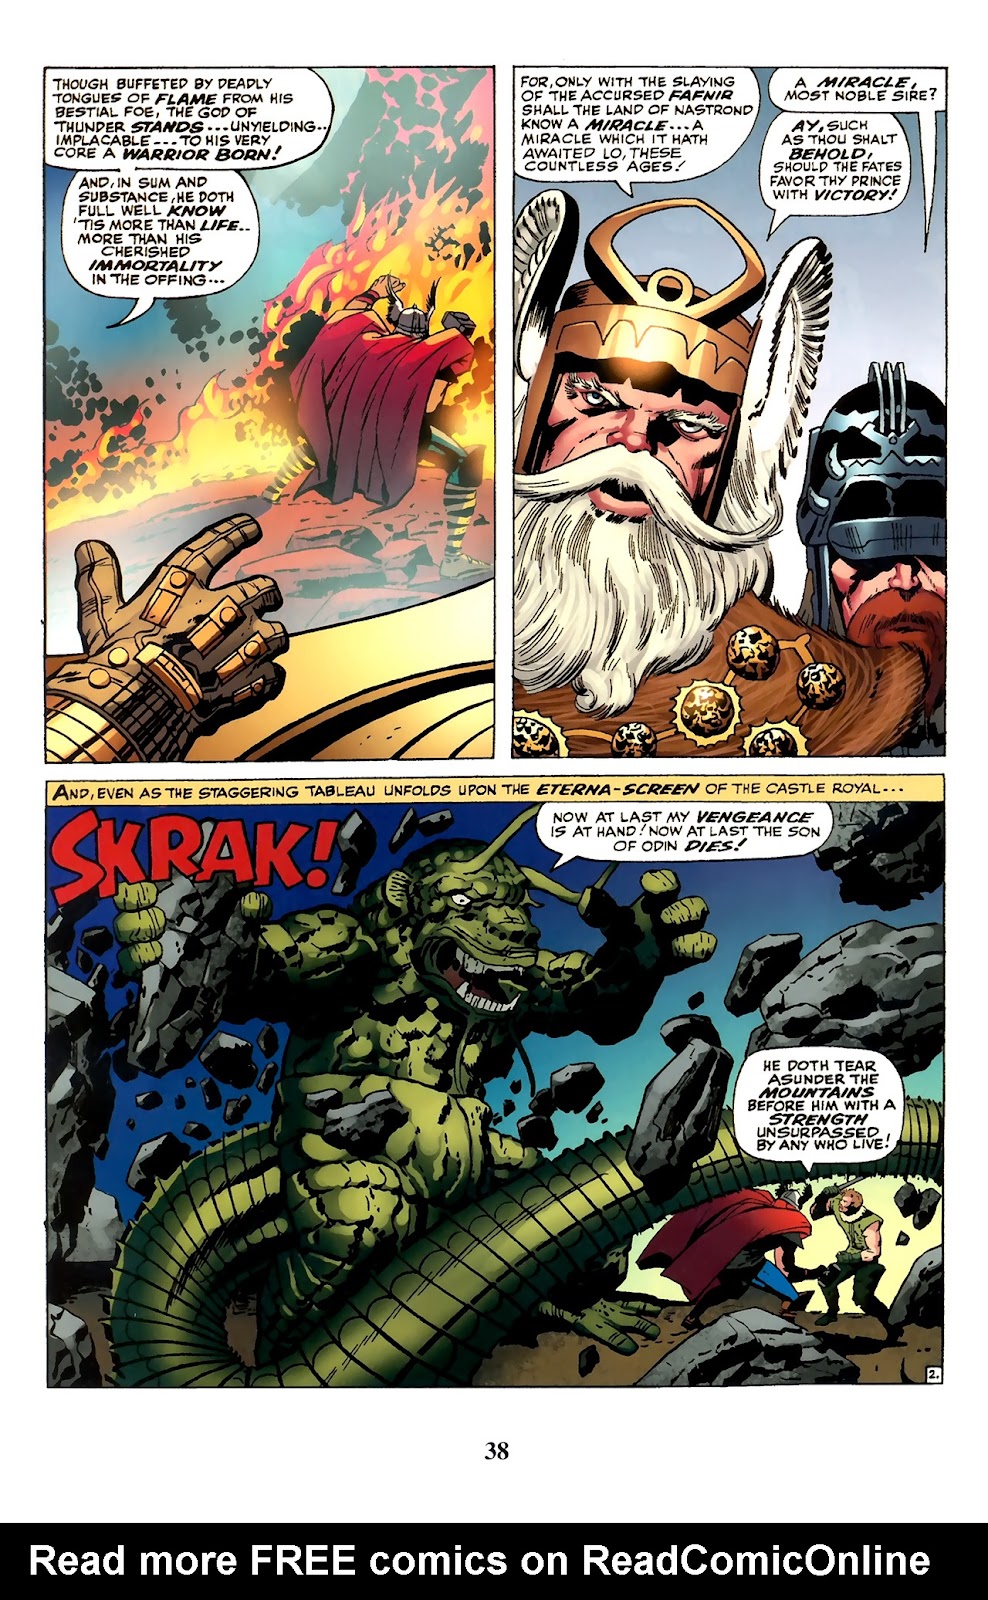 Thor: Tales of Asgard by Stan Lee & Jack Kirby issue 5 - Page 40